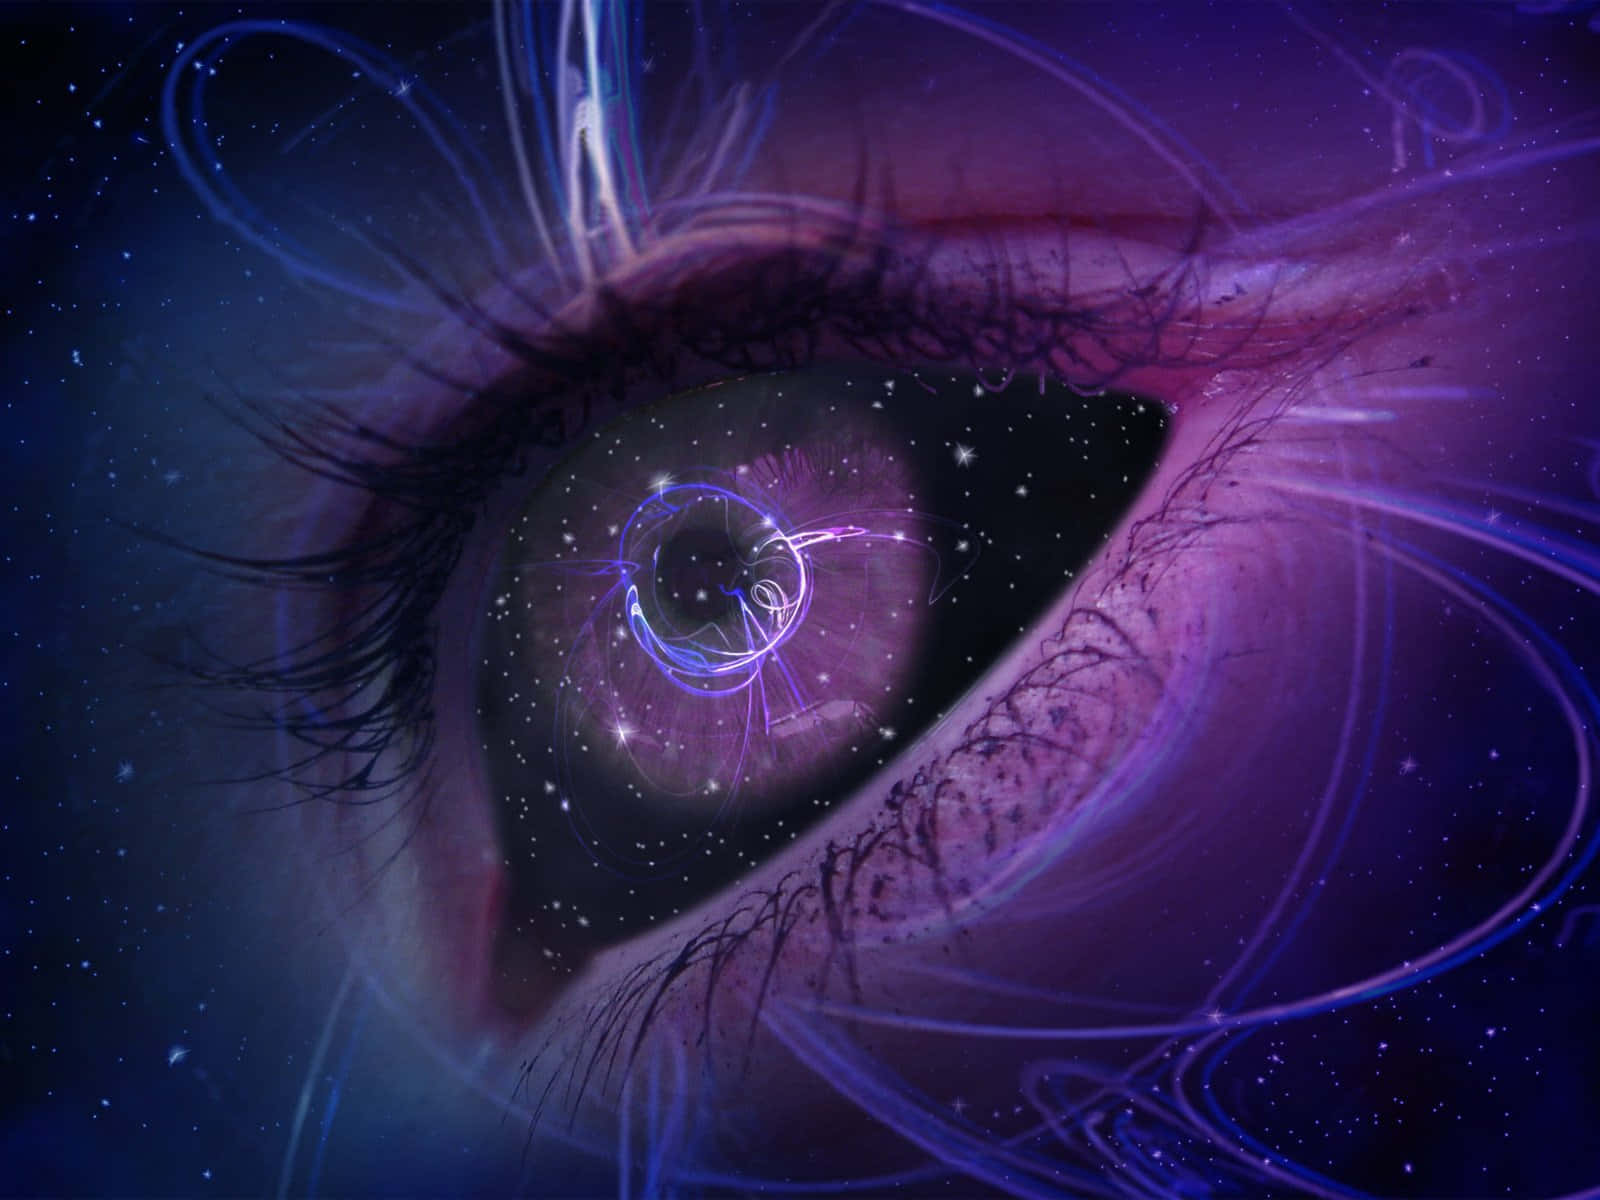 An Eye With Purple And Blue Colors